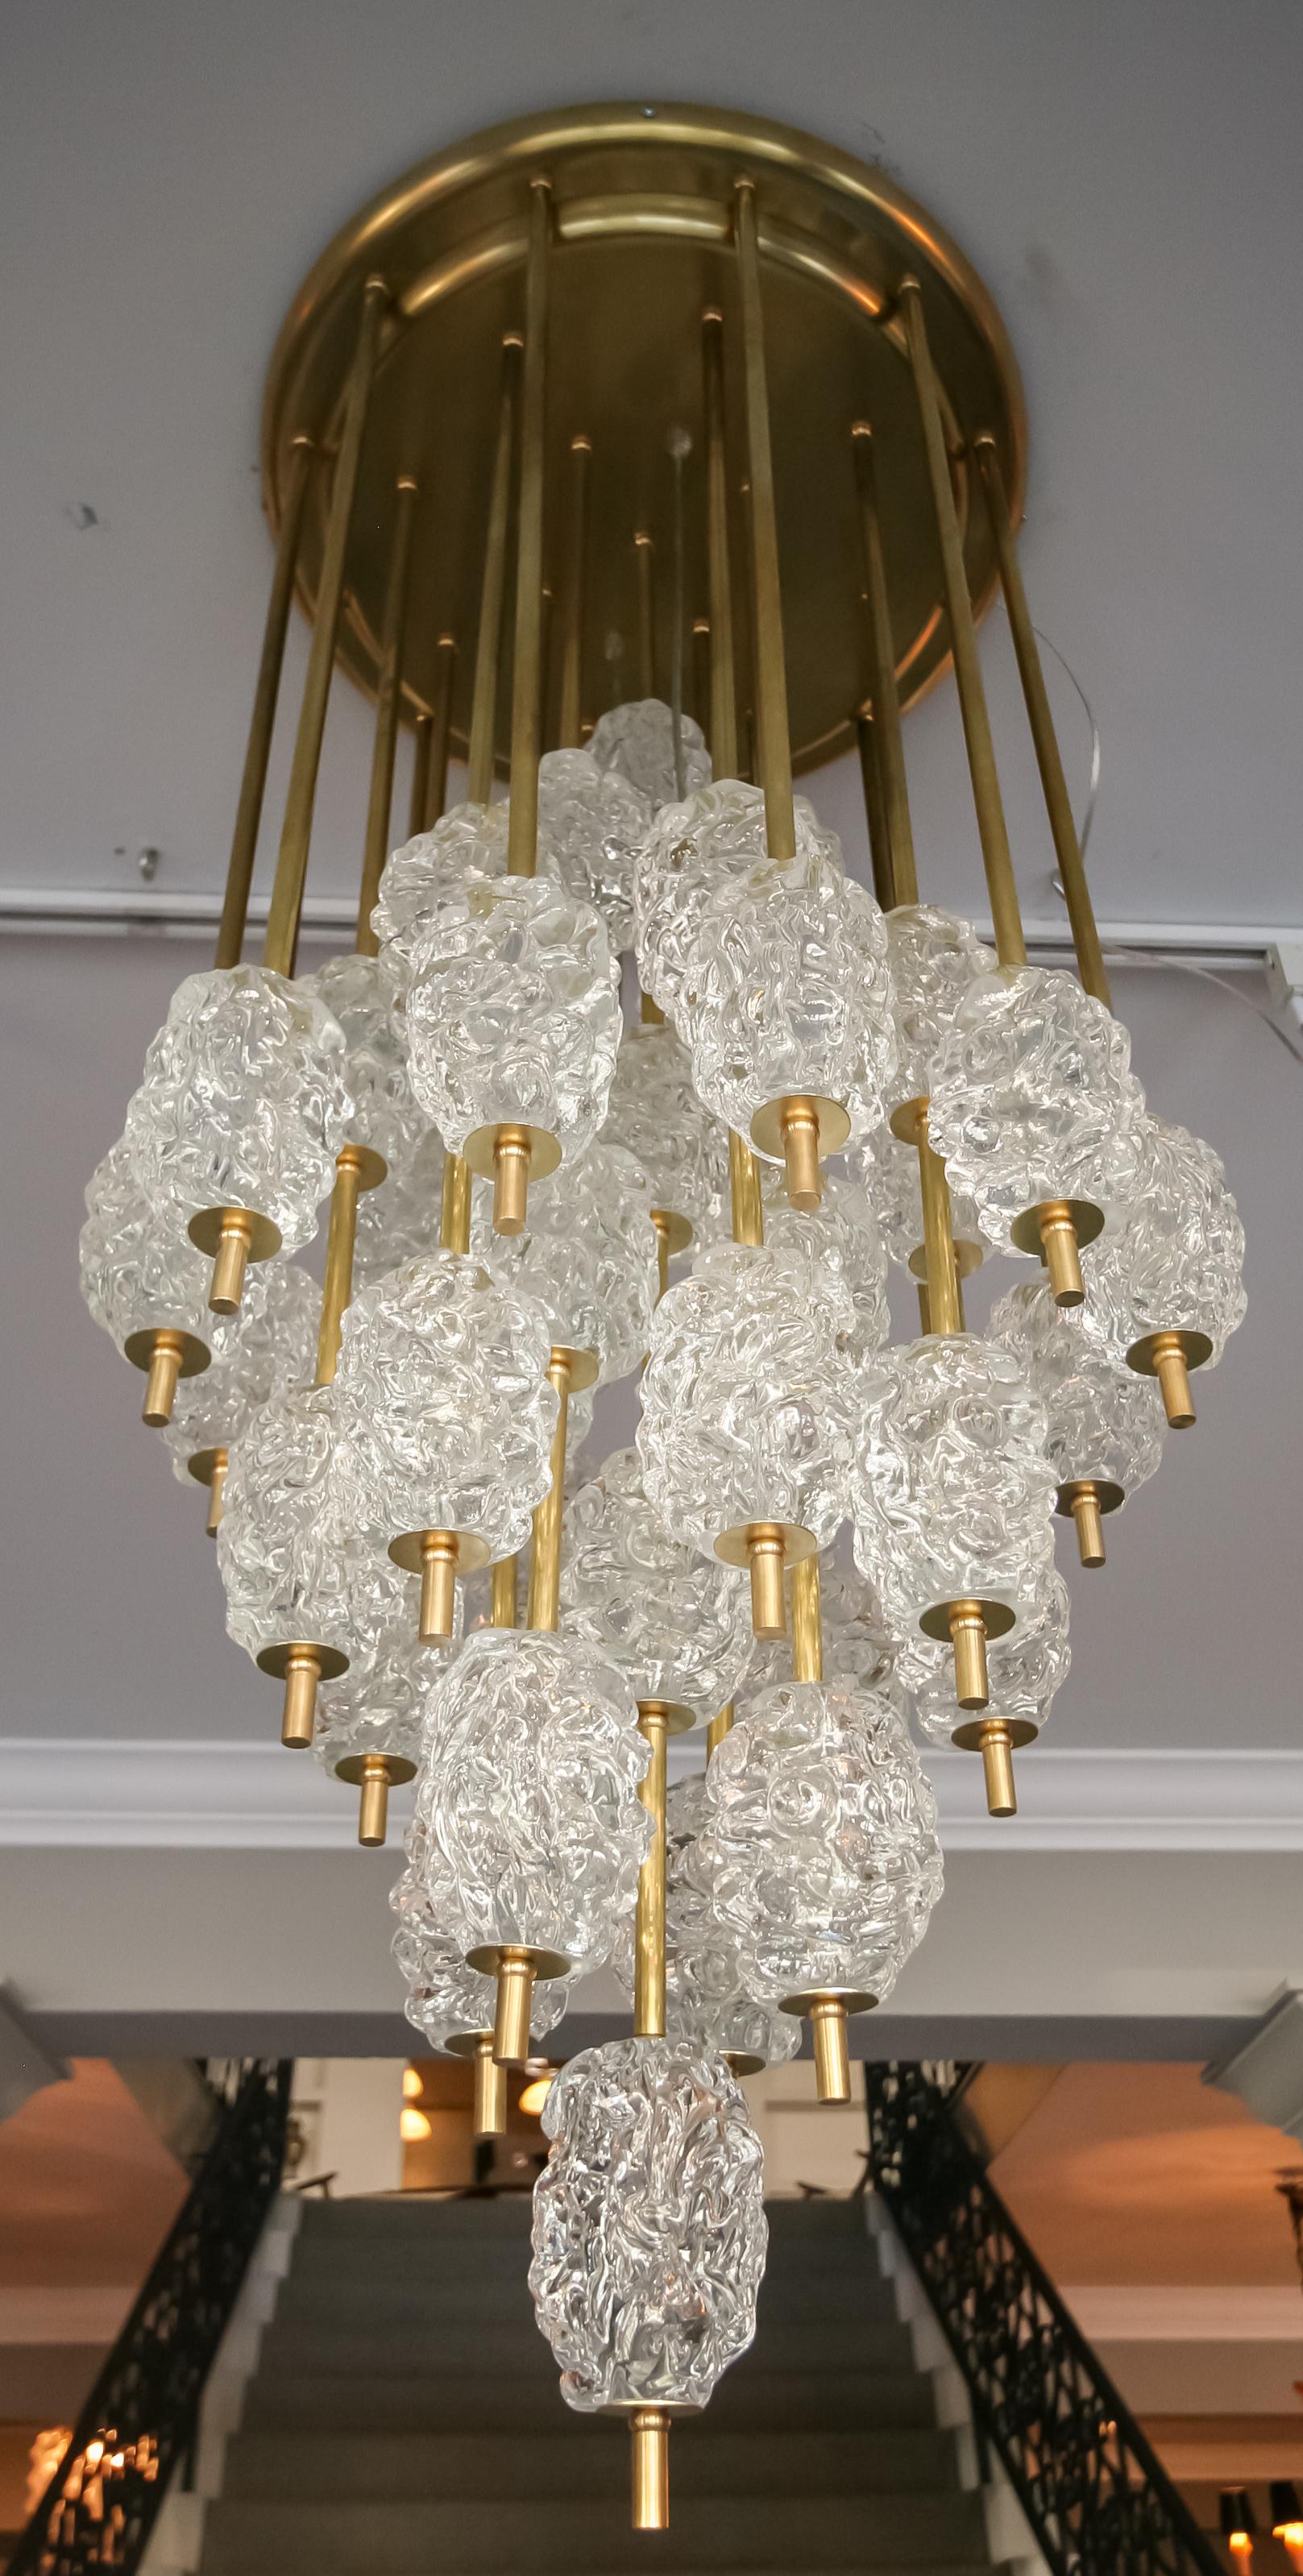 Diamant chandelier in the style of Barovier e Toso 1970s with brass frame and textured transparent glass.